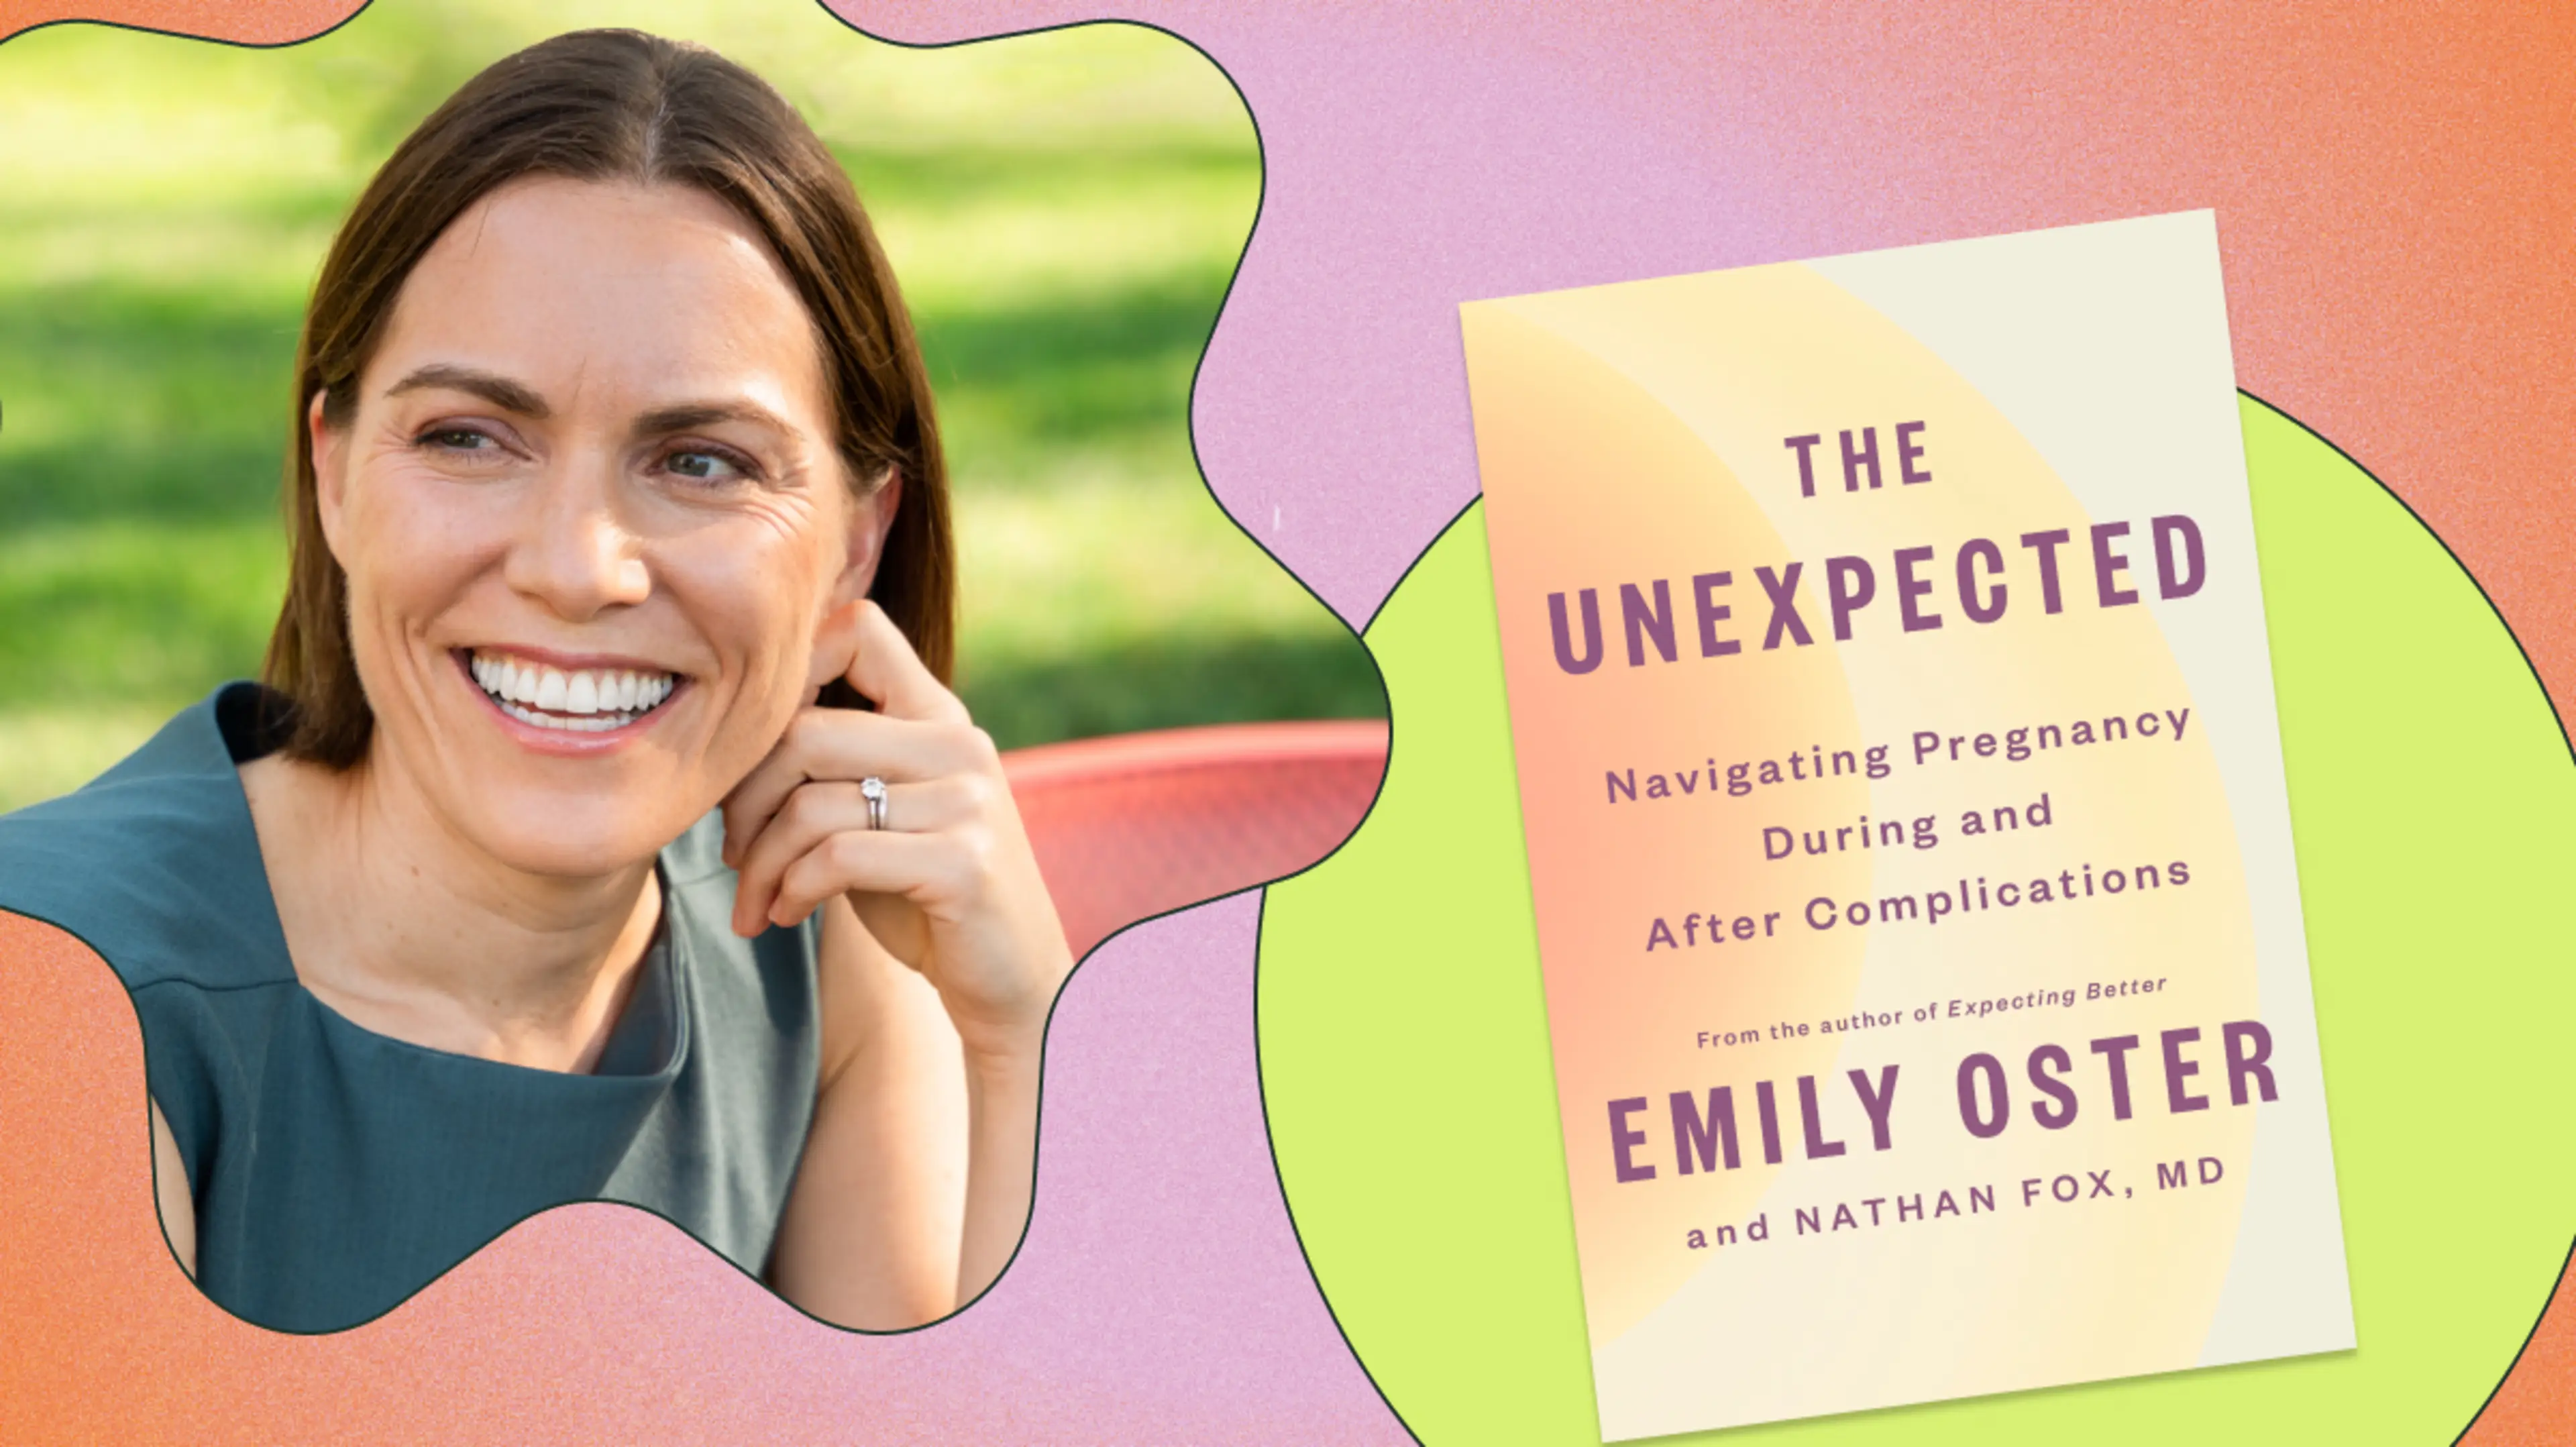 Emily Oster Shares Her Strategies for Preparing for the Unexpected - article body